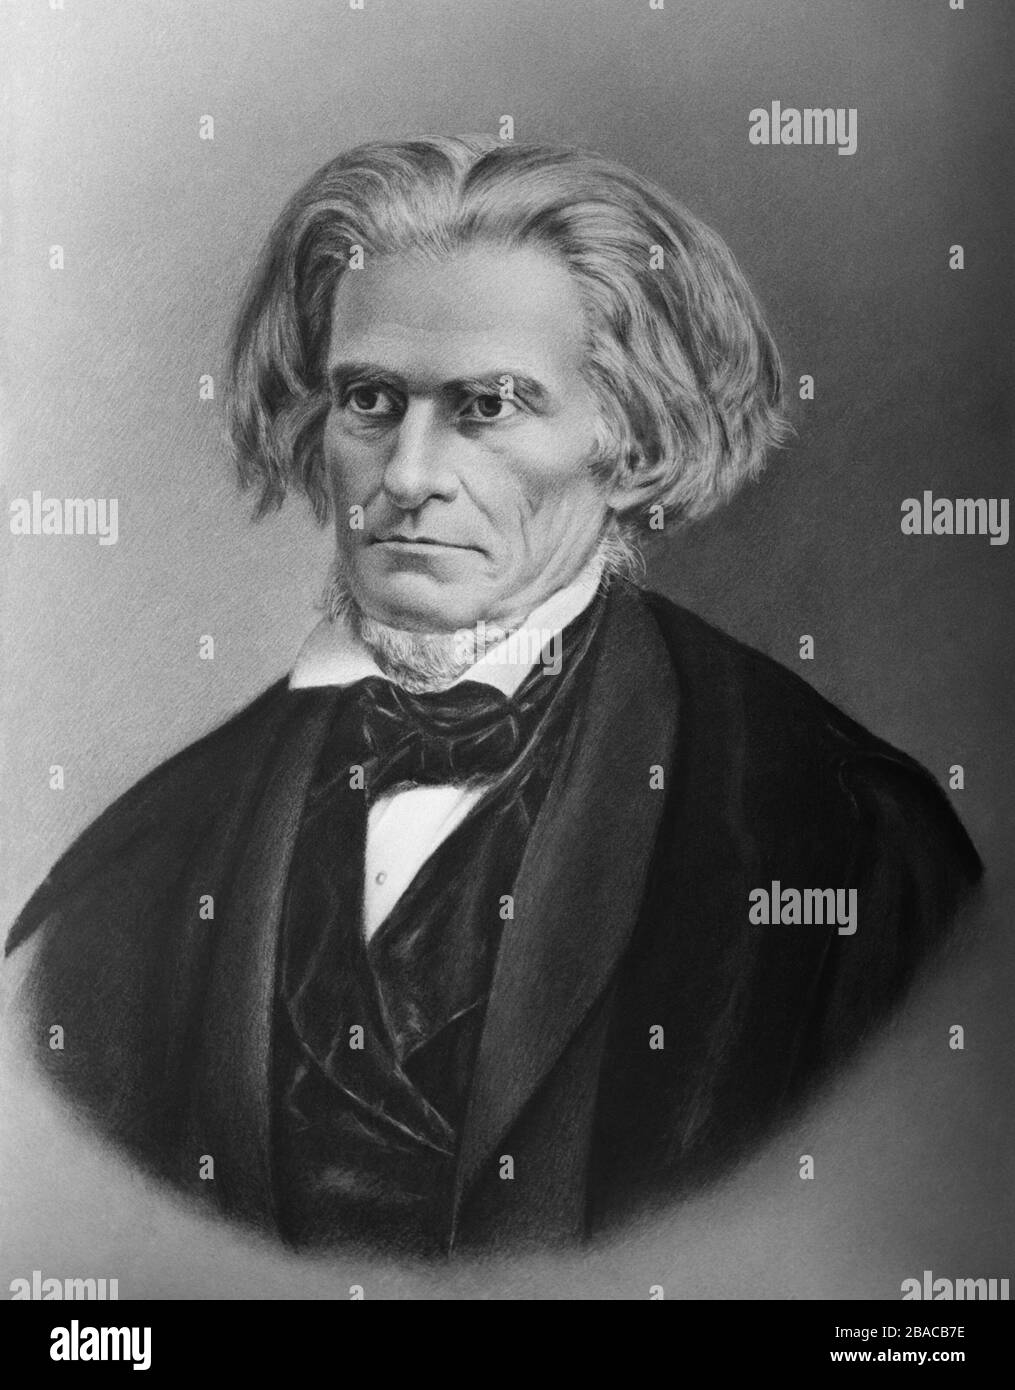 South Carolina Senator, John Calhoun, fought for the 'states rights' of the American South and its greater independence, within the United States. He argued that enslavement of African Americans benefited all involved, including the slaves. Photograph by C.M. Bell, 1849  (BSLOC 2019 7 28) Stock Photo